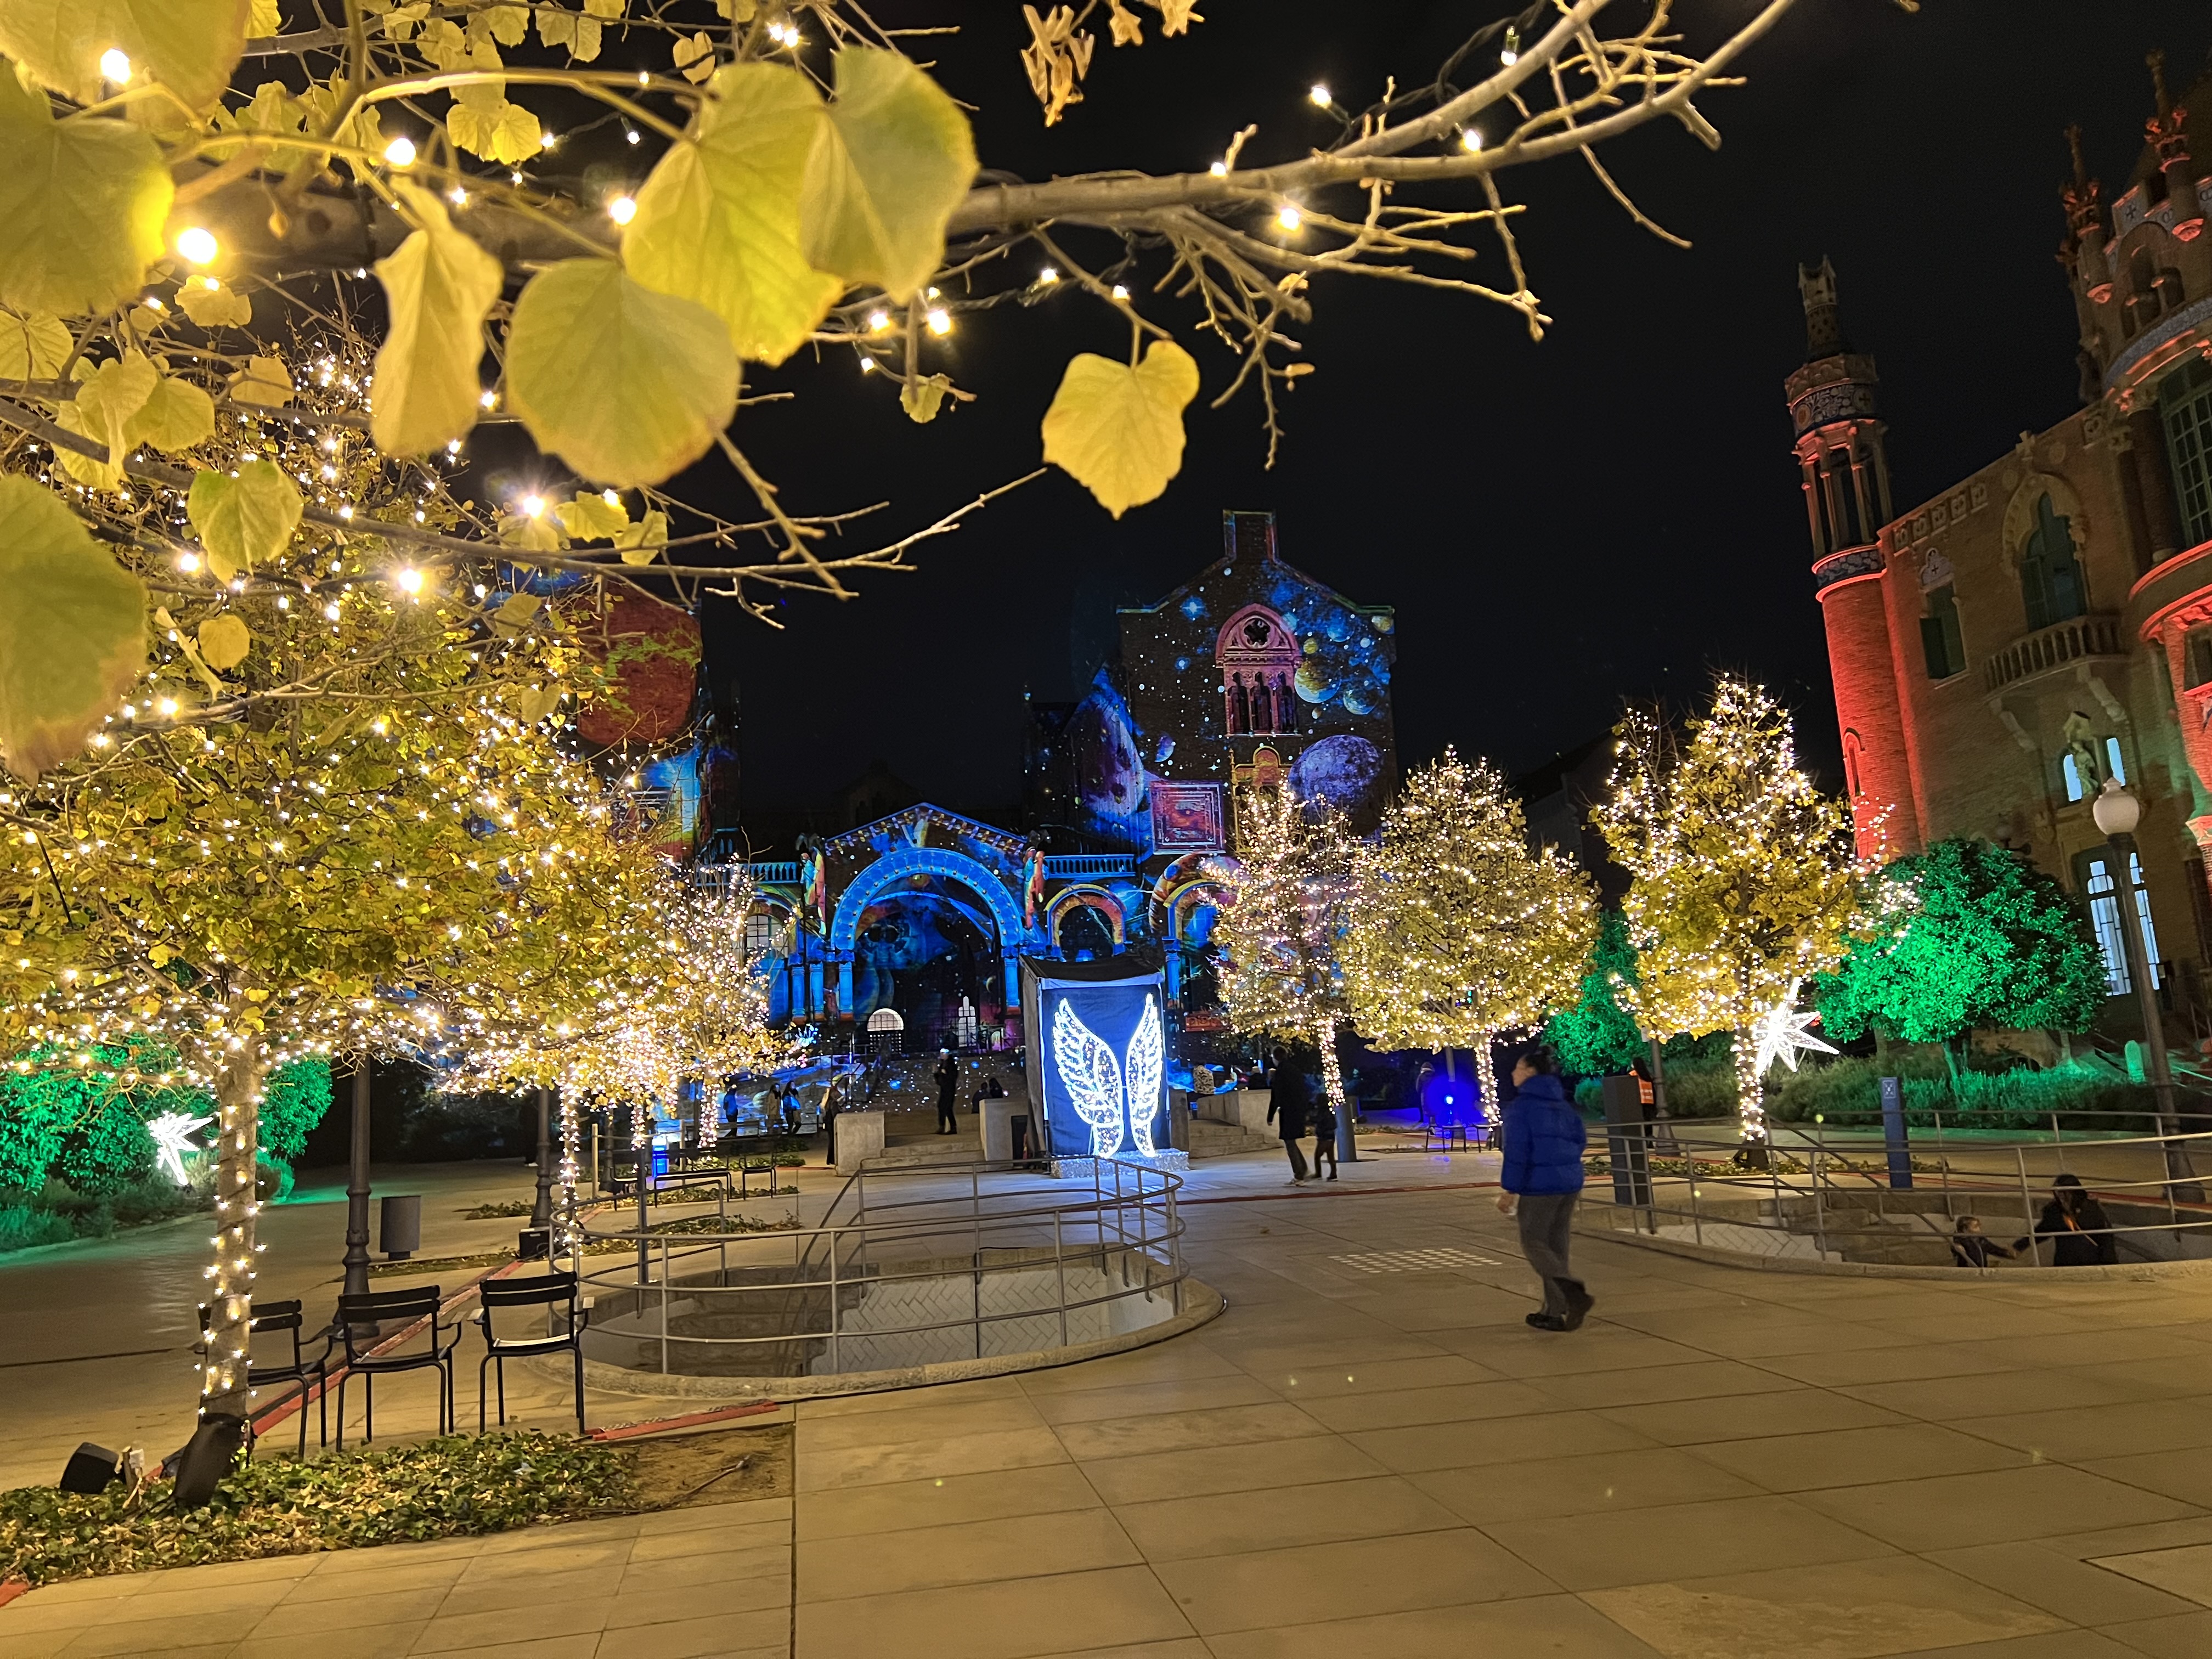 An image of the Christmas lights show at the modernist enclosure of Sant Pau